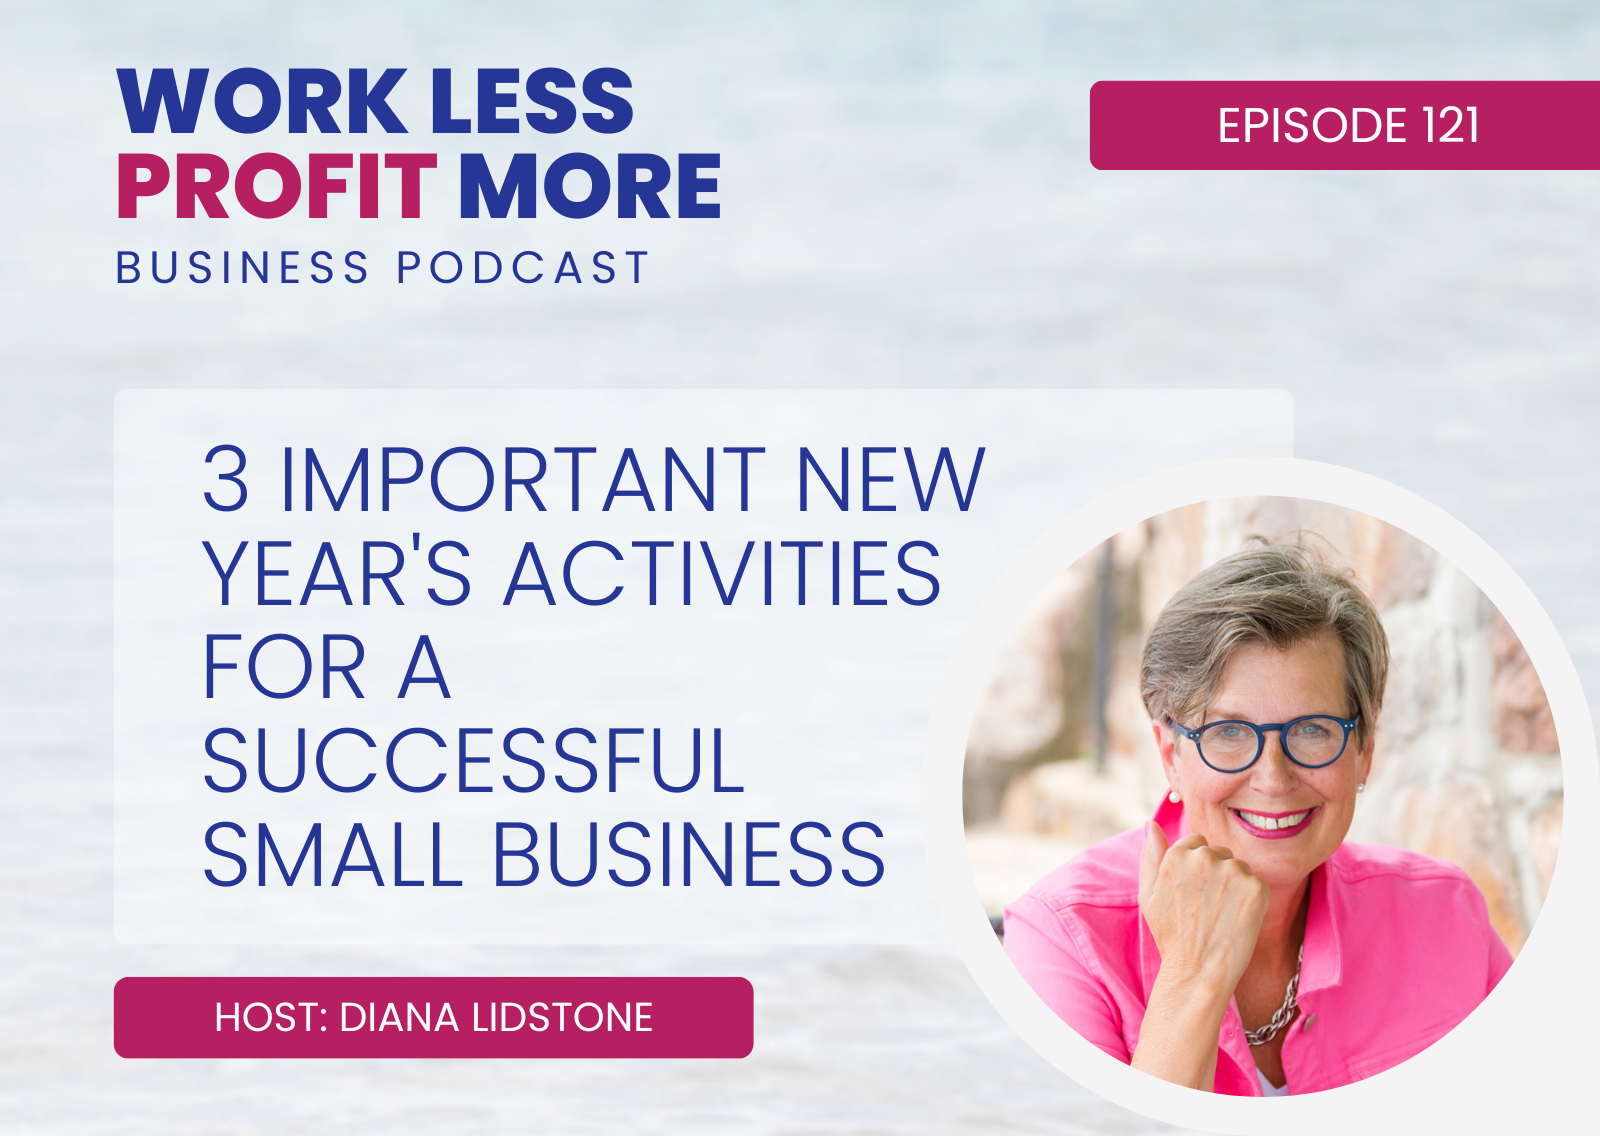 3 Important New Year's Activities for a Successful Small Business